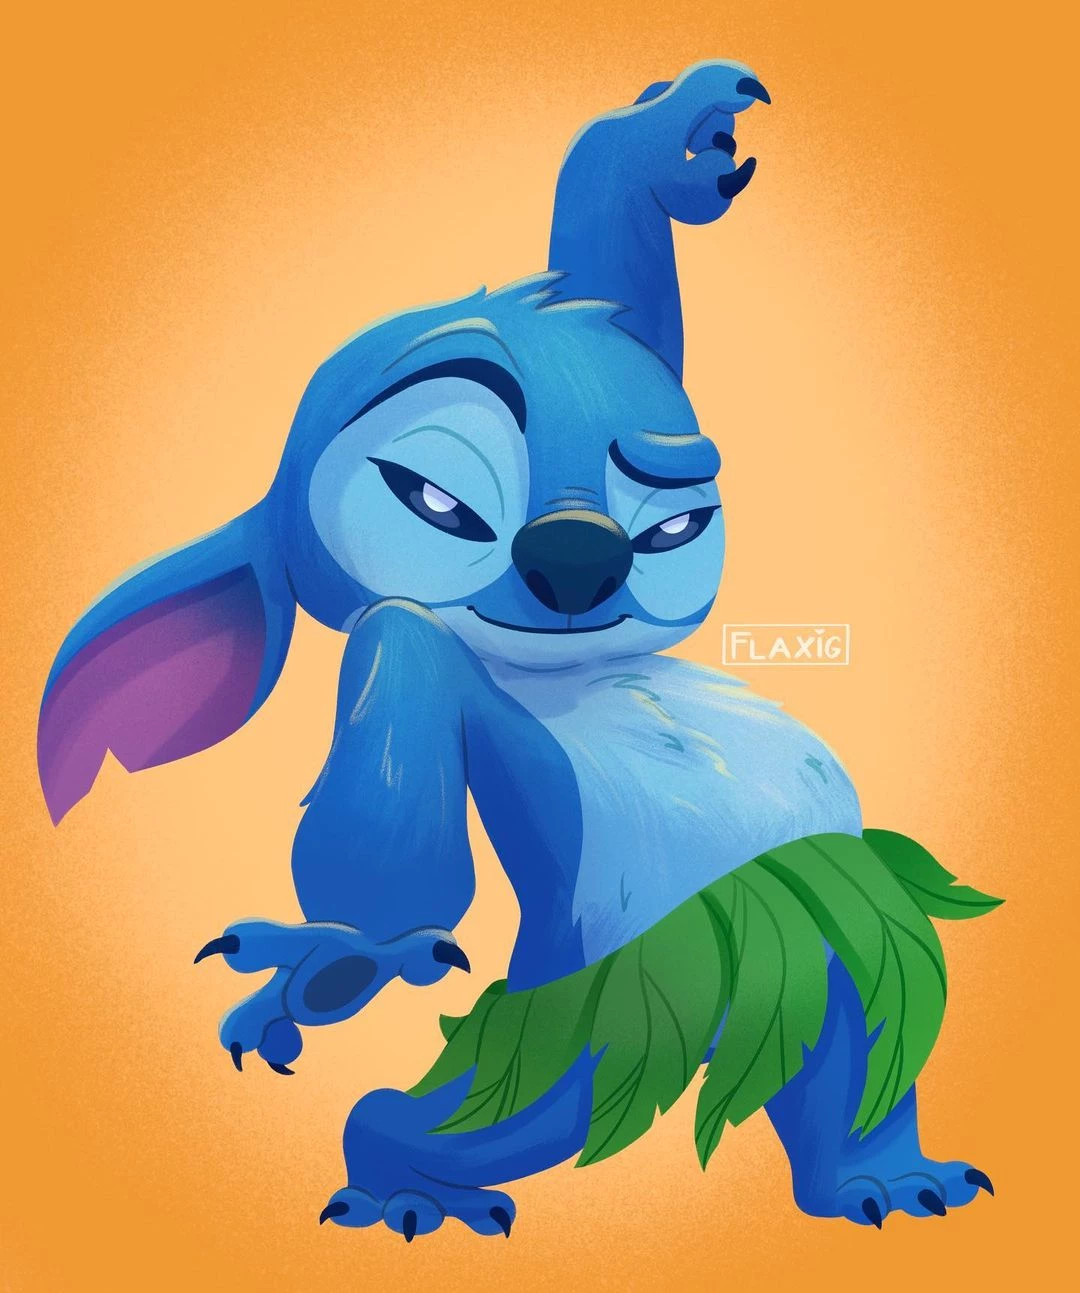 And Last But Not Least, We Have Stitch, Who’s Nailing His Hula Performance (Lilo & Stitch)